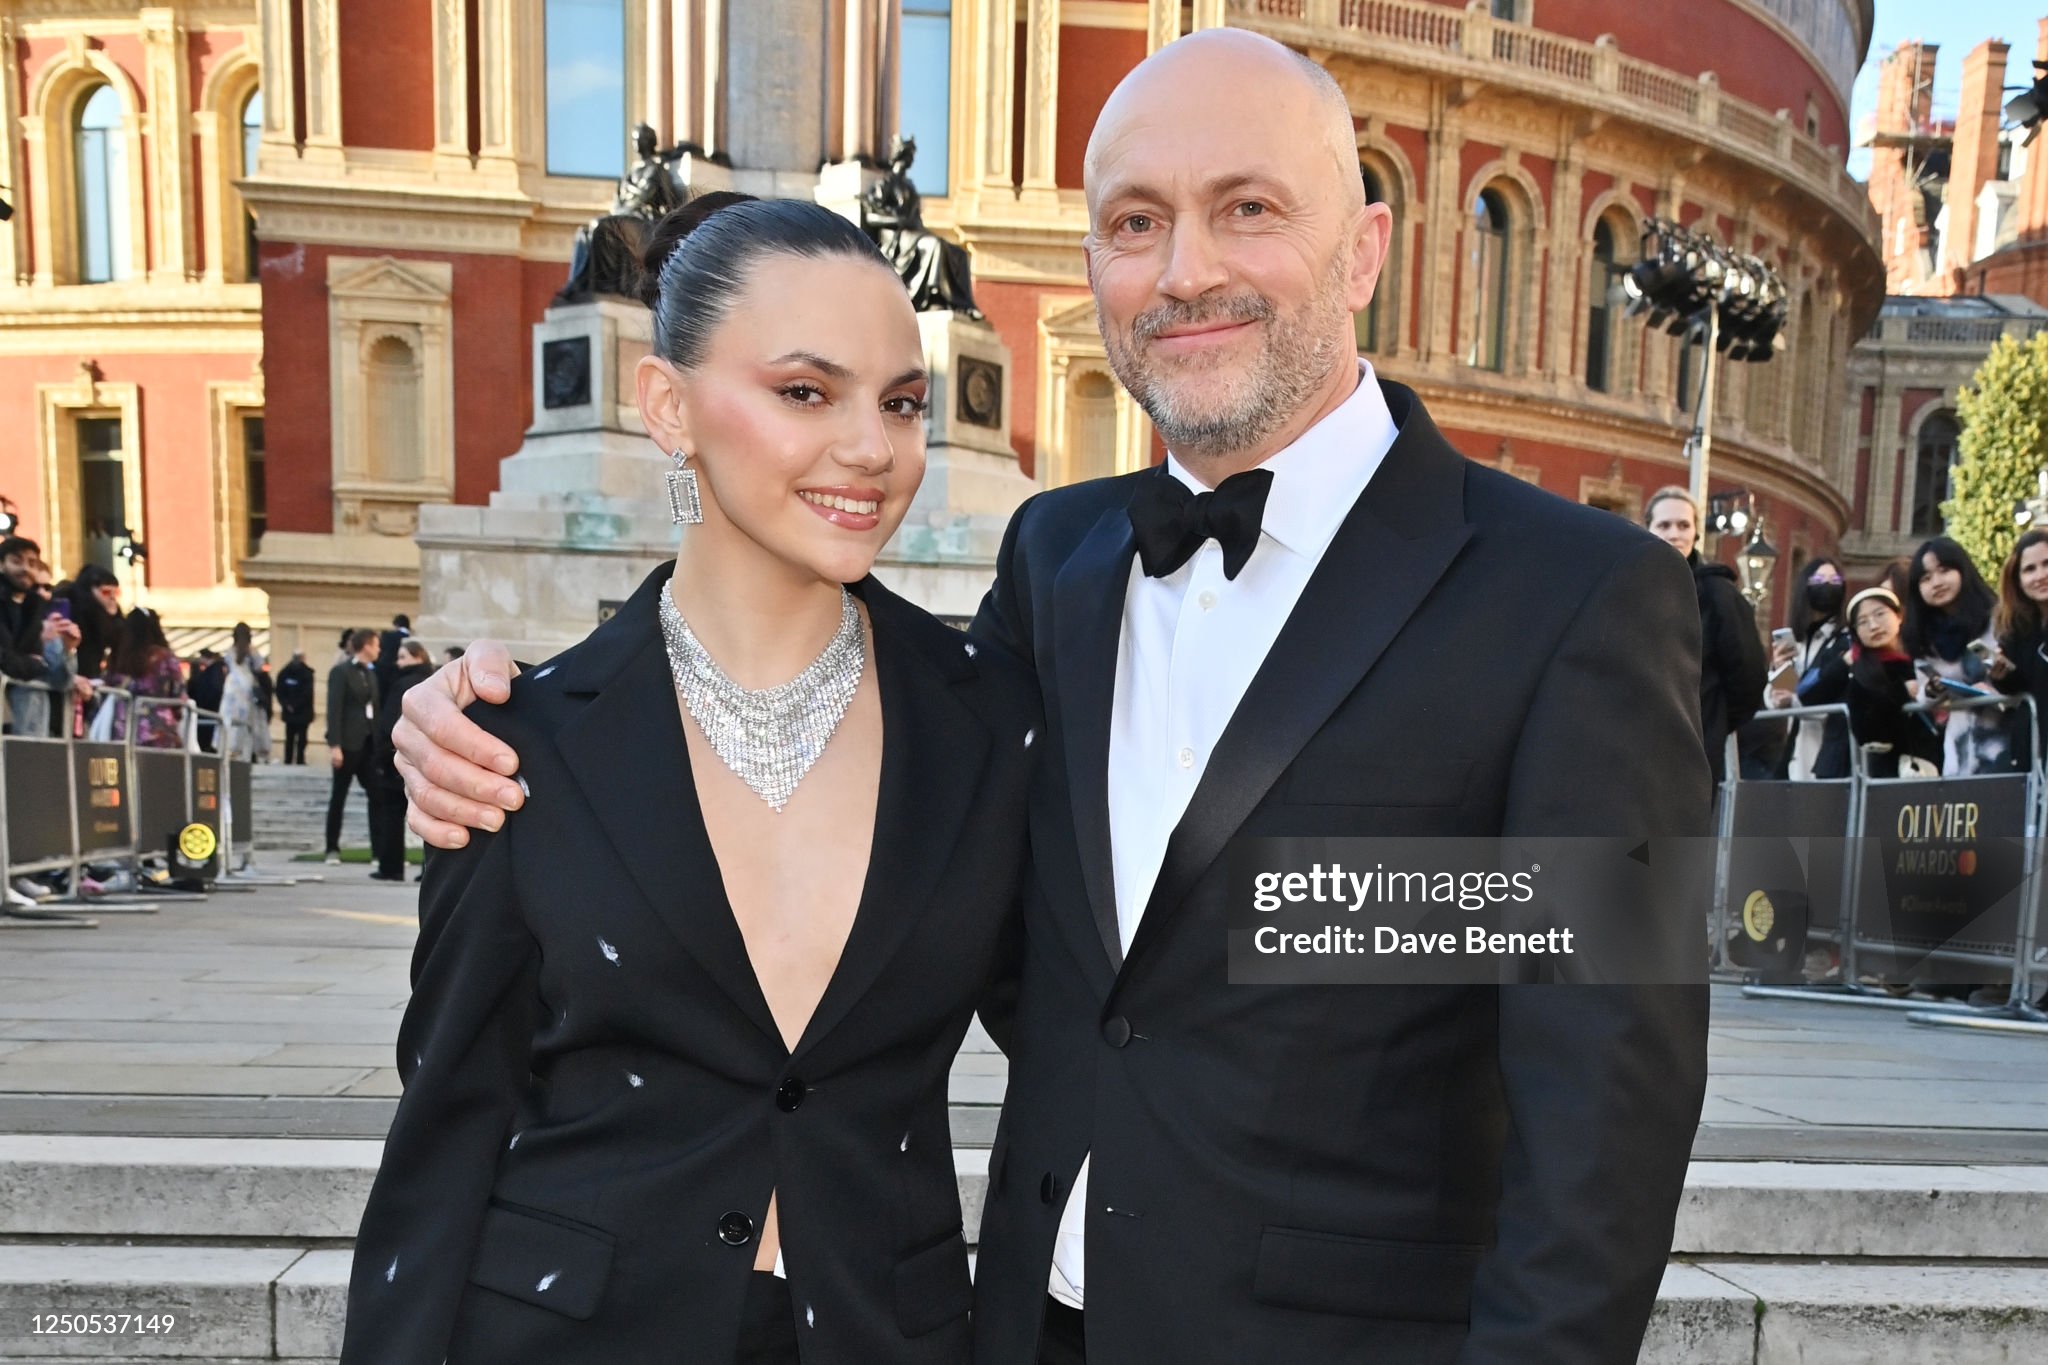 dafne-keen-and-will-keen-attend-the-olivier-awards-2023-at-royal-albert-hall-on-april-2-2023.jpg